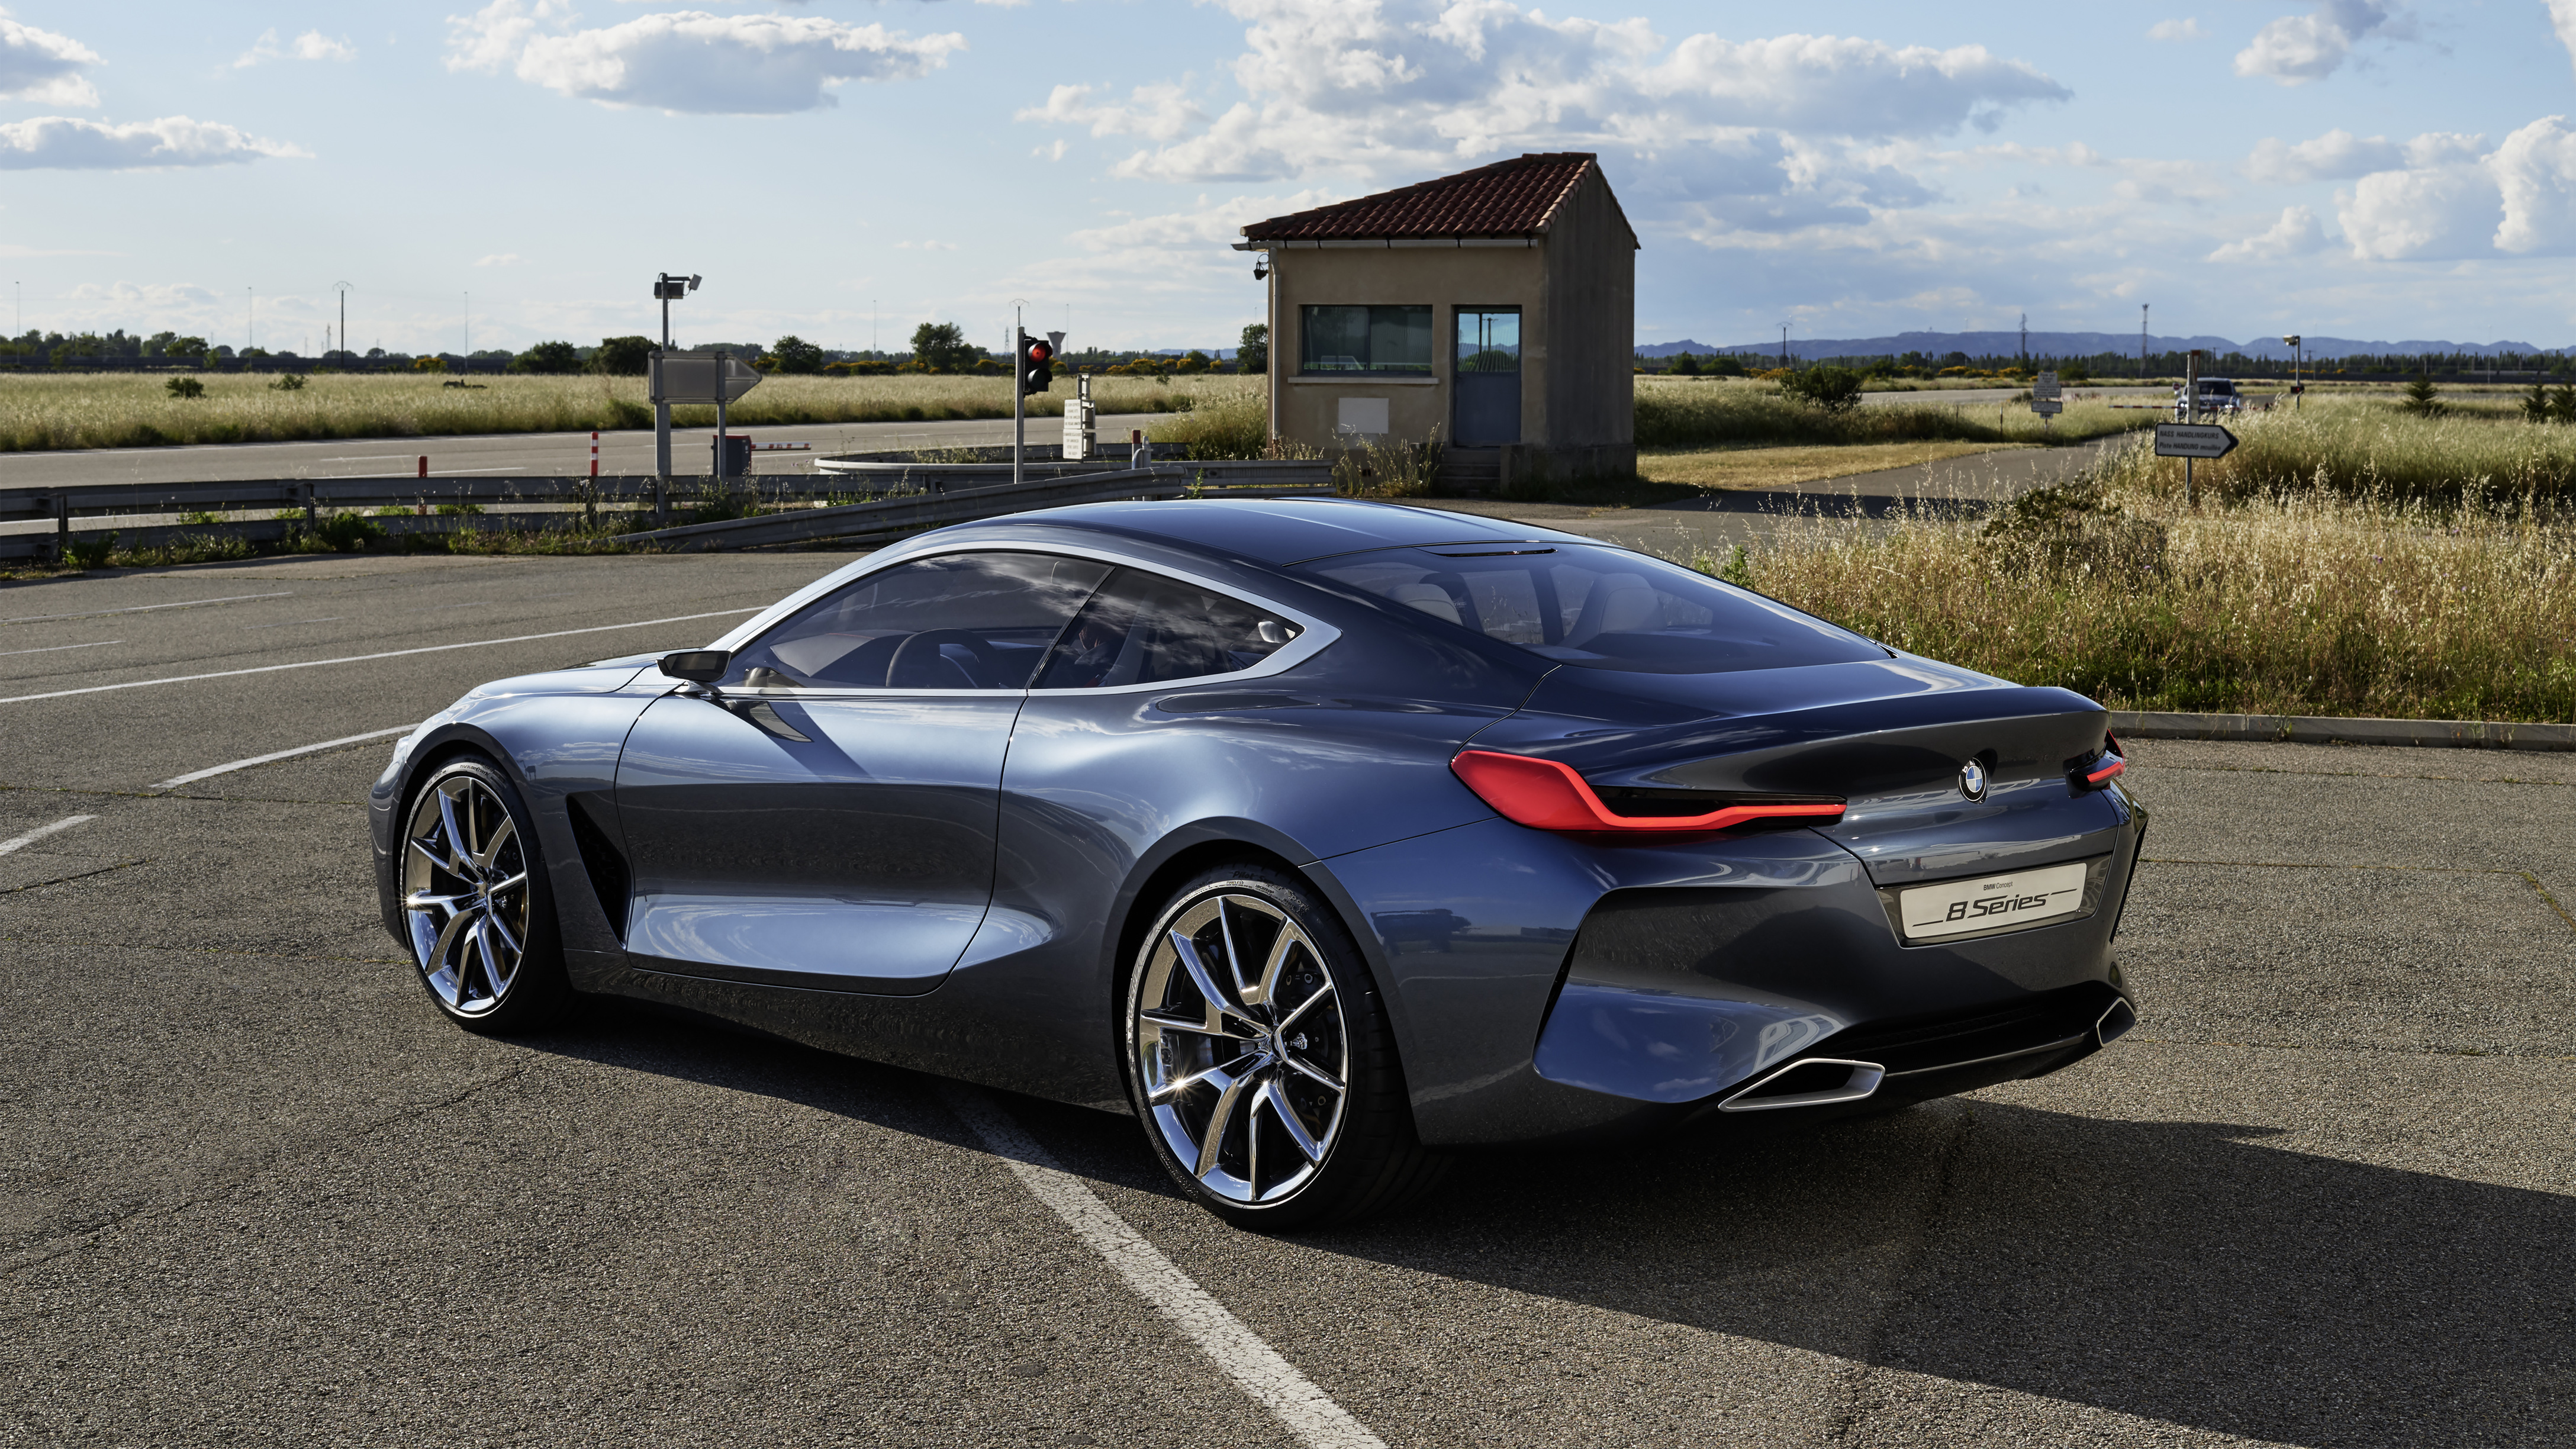 Bmw Concept 8 Series Wallpapers